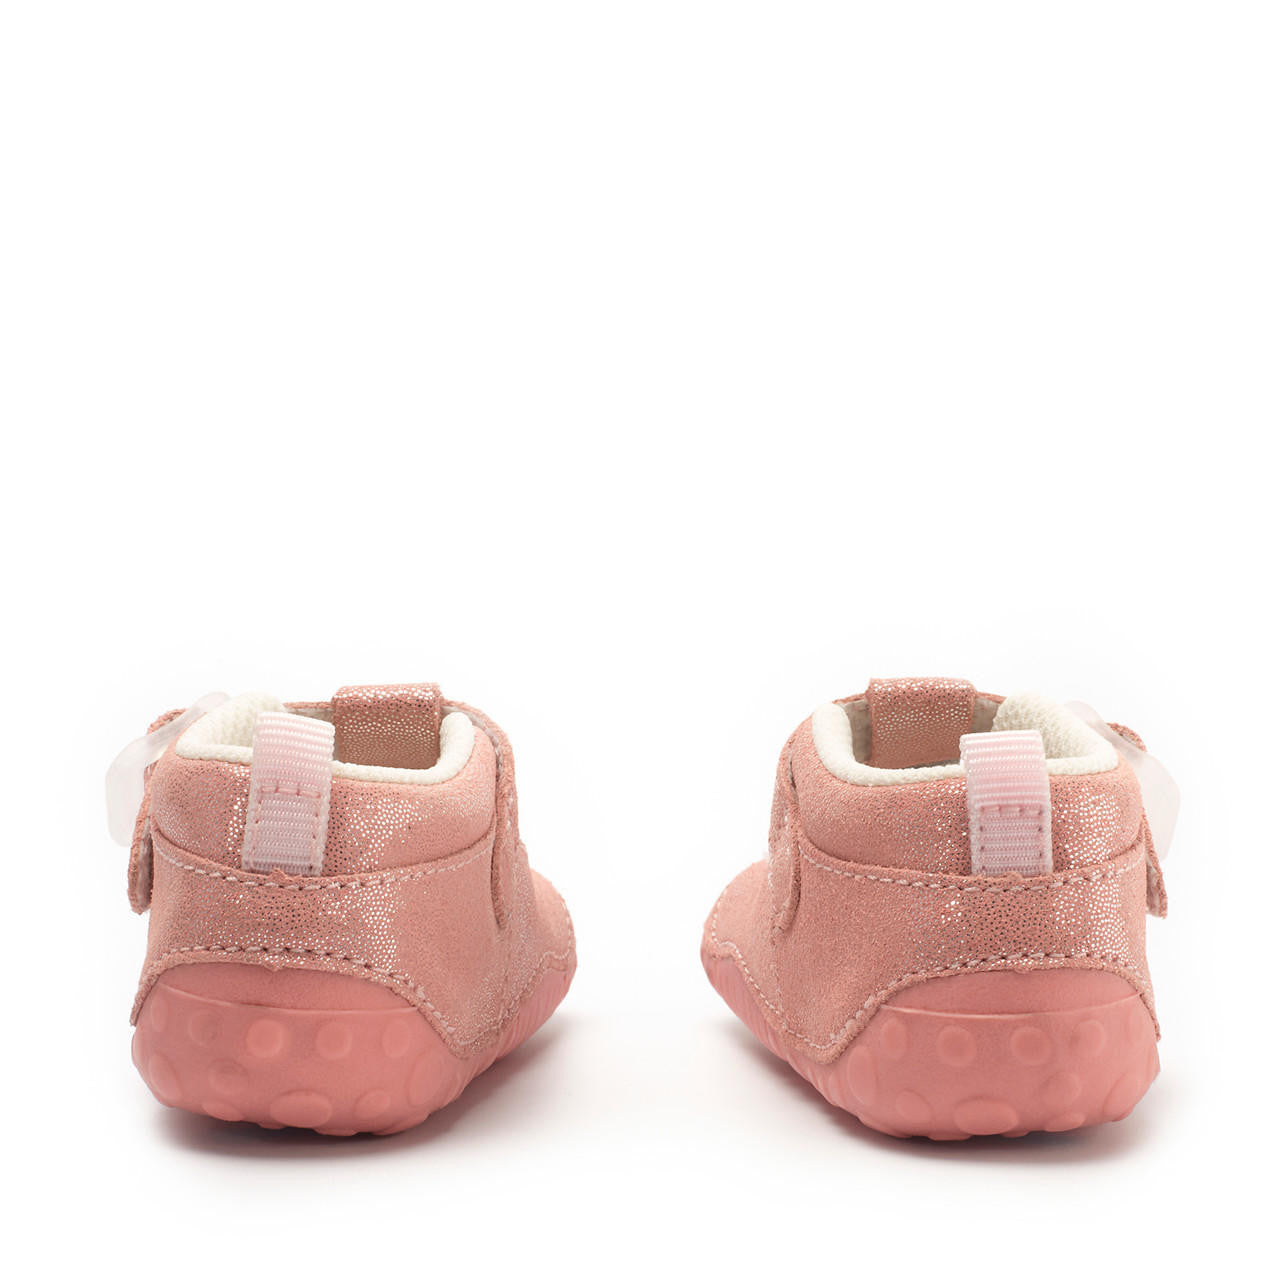 A girls pre-walker by Start-Rite, style Baby Bubble in coral glitter, with buckle fastening. Back view.